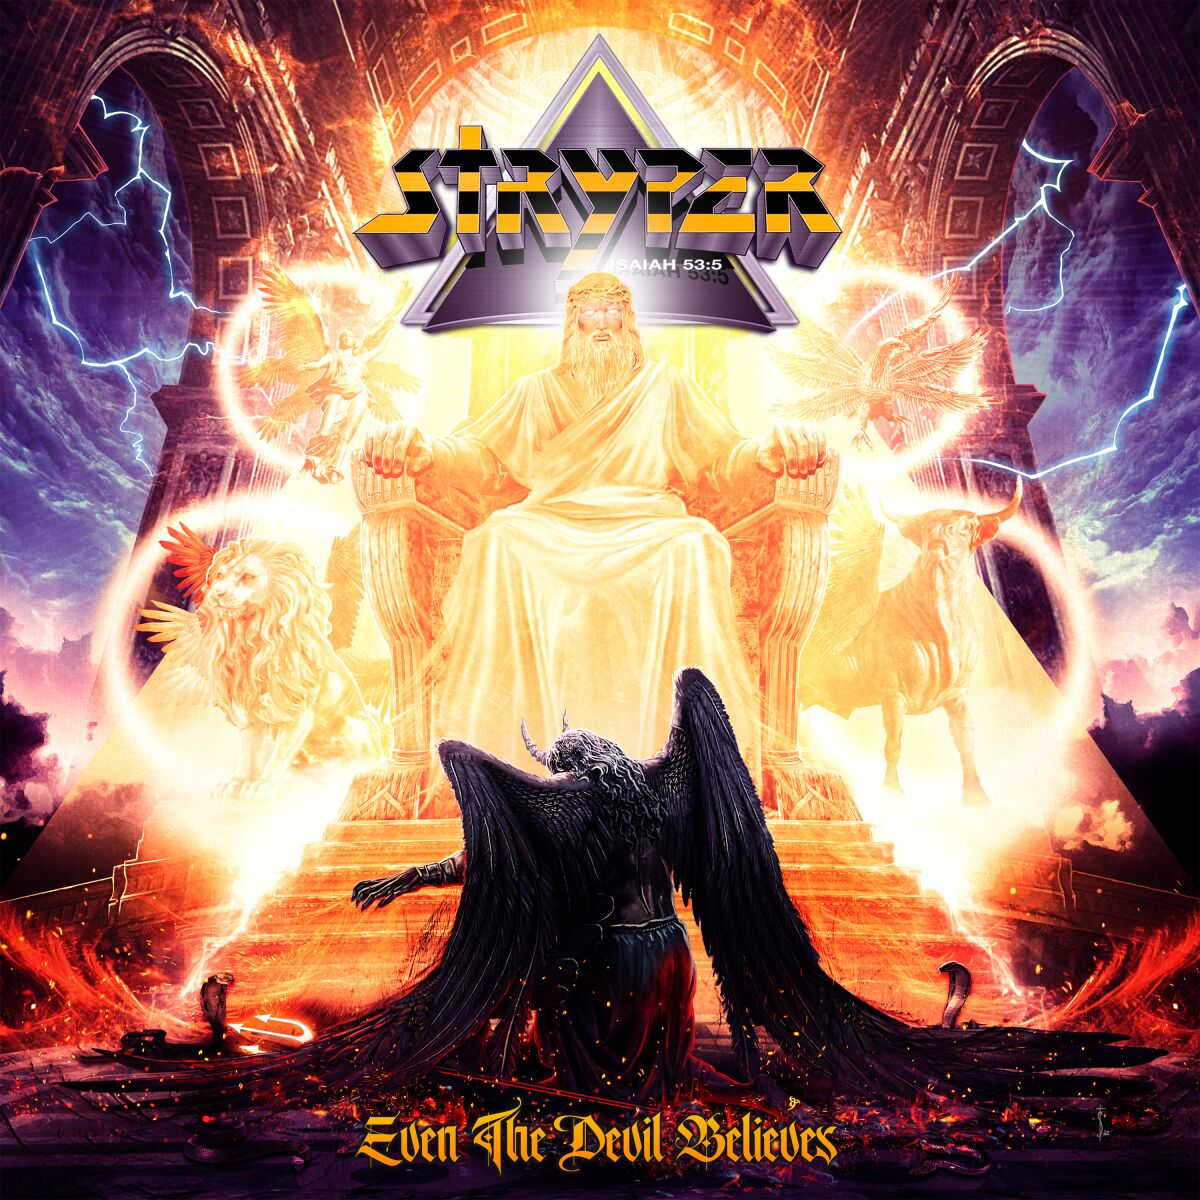 This cover image released by Frontiers shows "Even the Devil Believes" by Stryper. (Frontiers via AP)